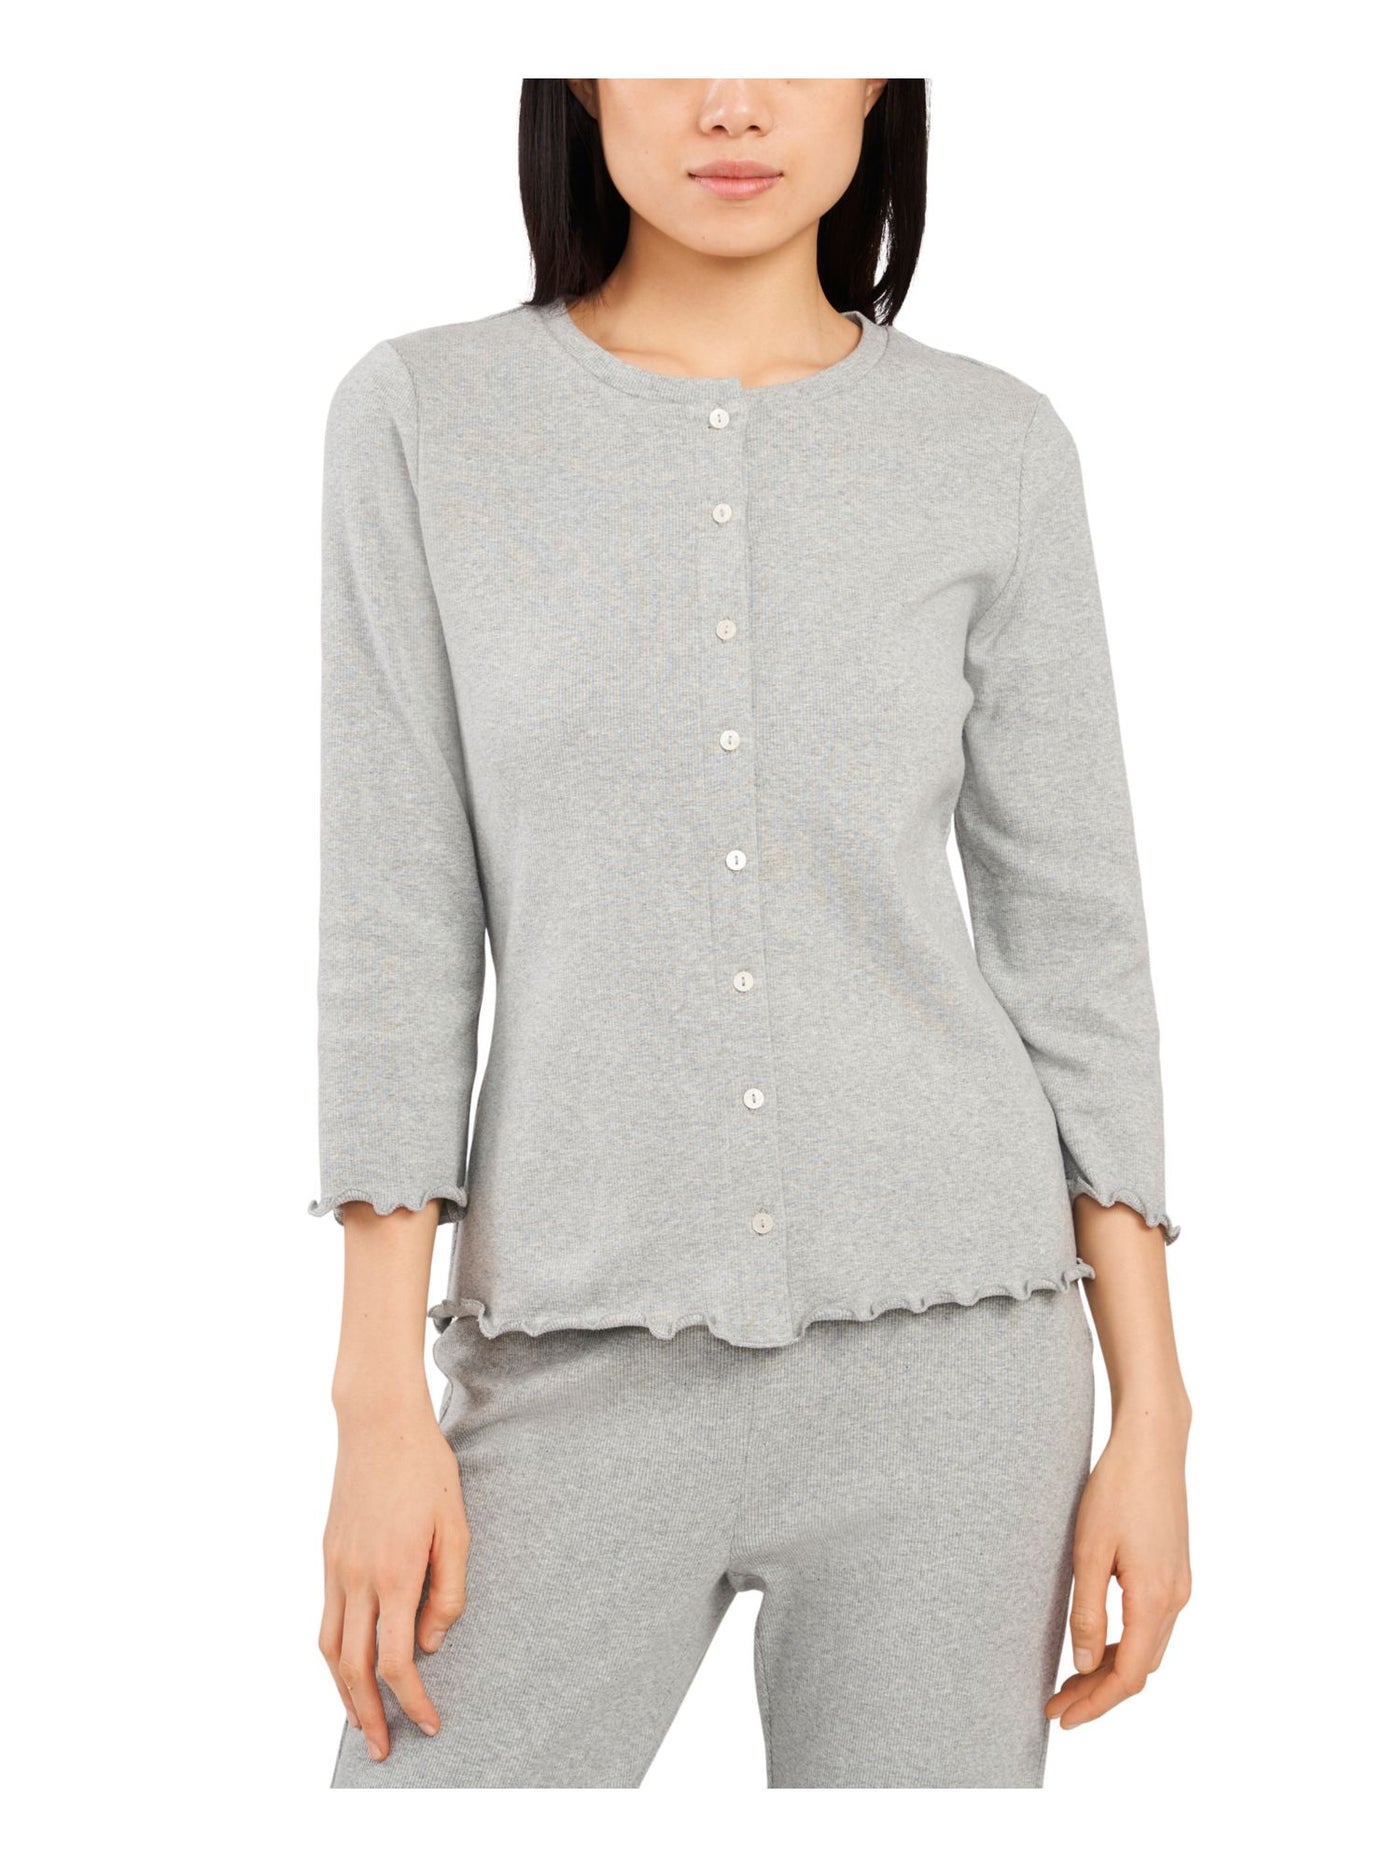 RILEY&RAE Womens Gray Ribbed Ruffled Cardigan Heather Long Sleeve Crew Neck Button Up Top XS